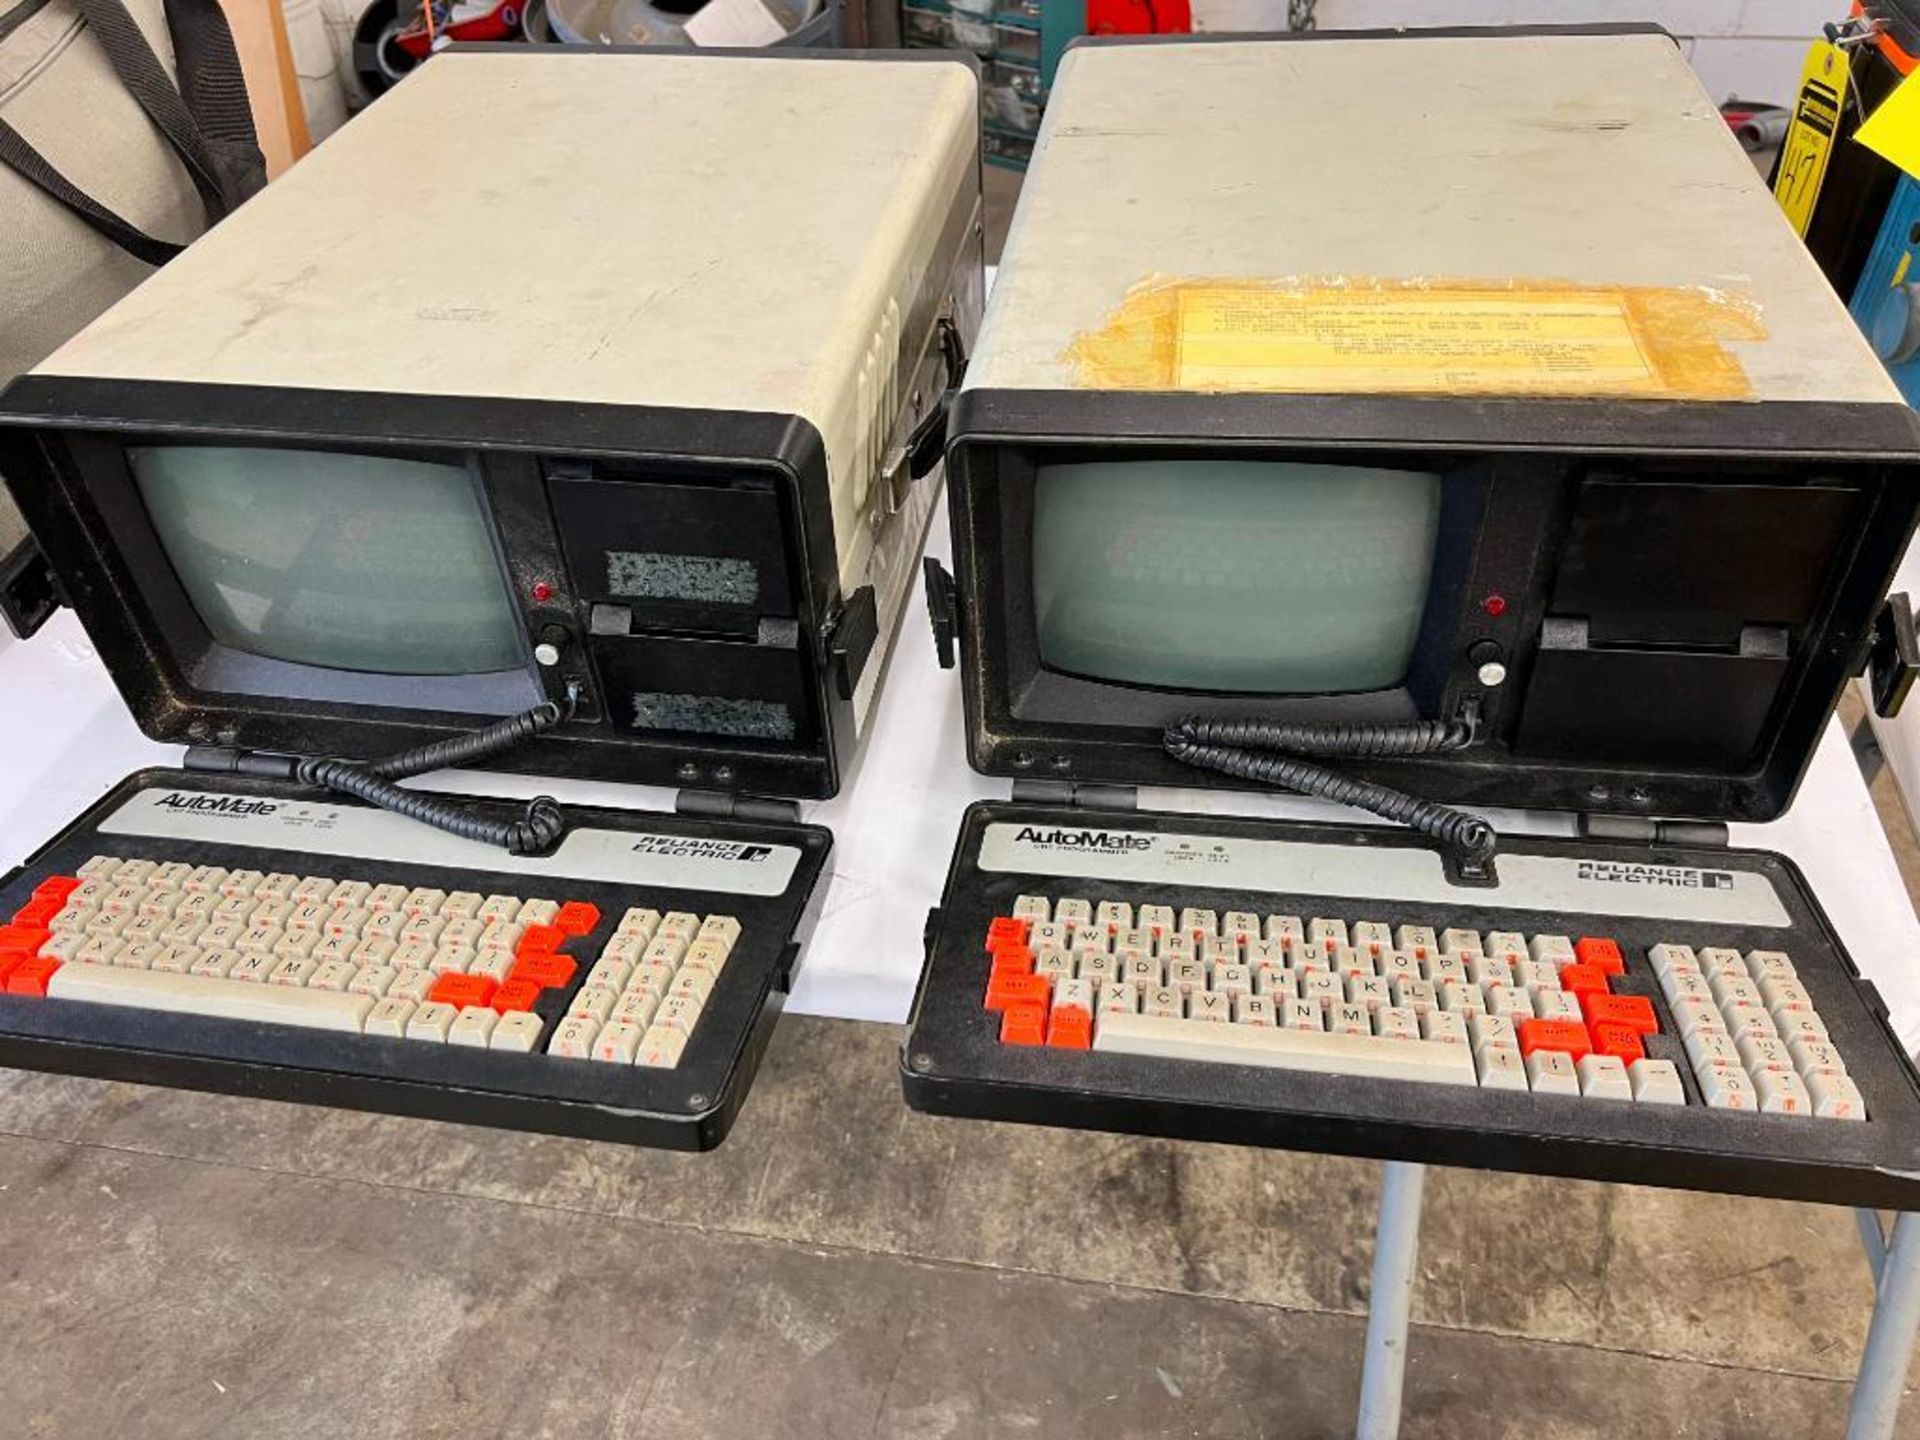 (2) RELIANCE ELECTRIC AUTOMATE CRT PROGRAMMERS, MODEL 45C115, 115/230V, 50/60 HZ